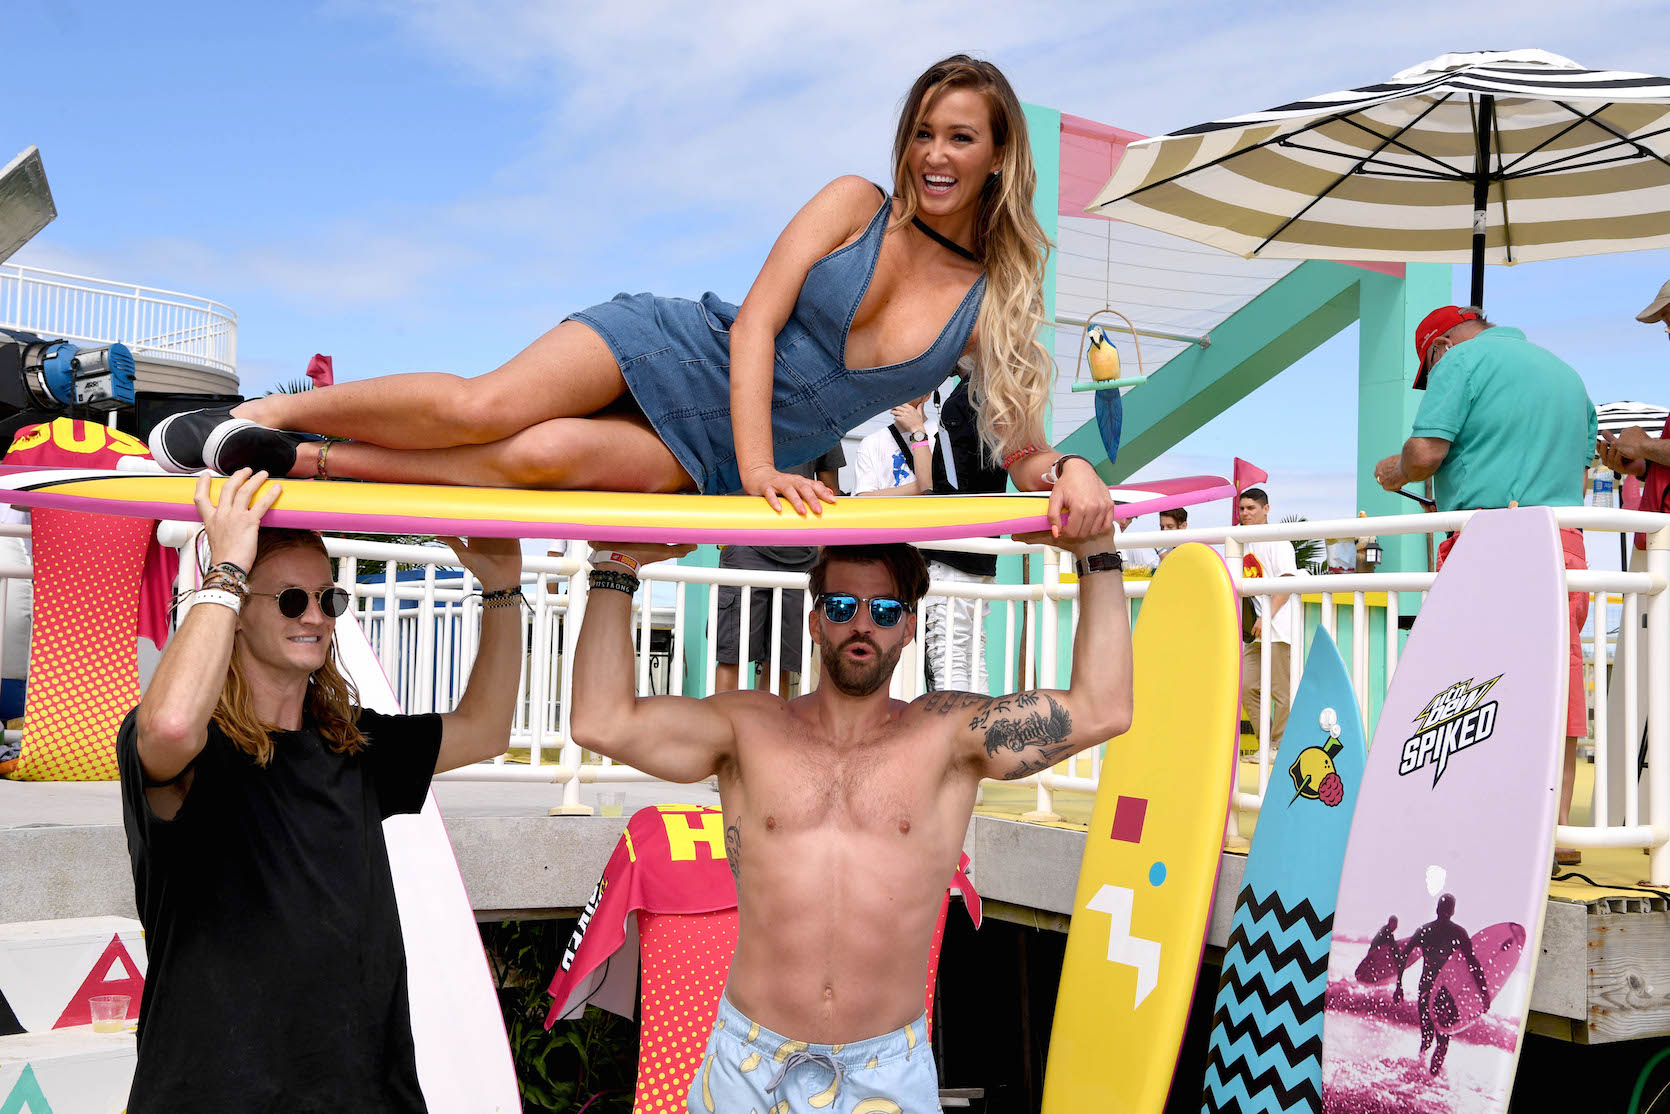 Ashley Mitchell on a surfboard held by Johnny 'Bananas' Devenanzio of MTV's 'The Challenge'